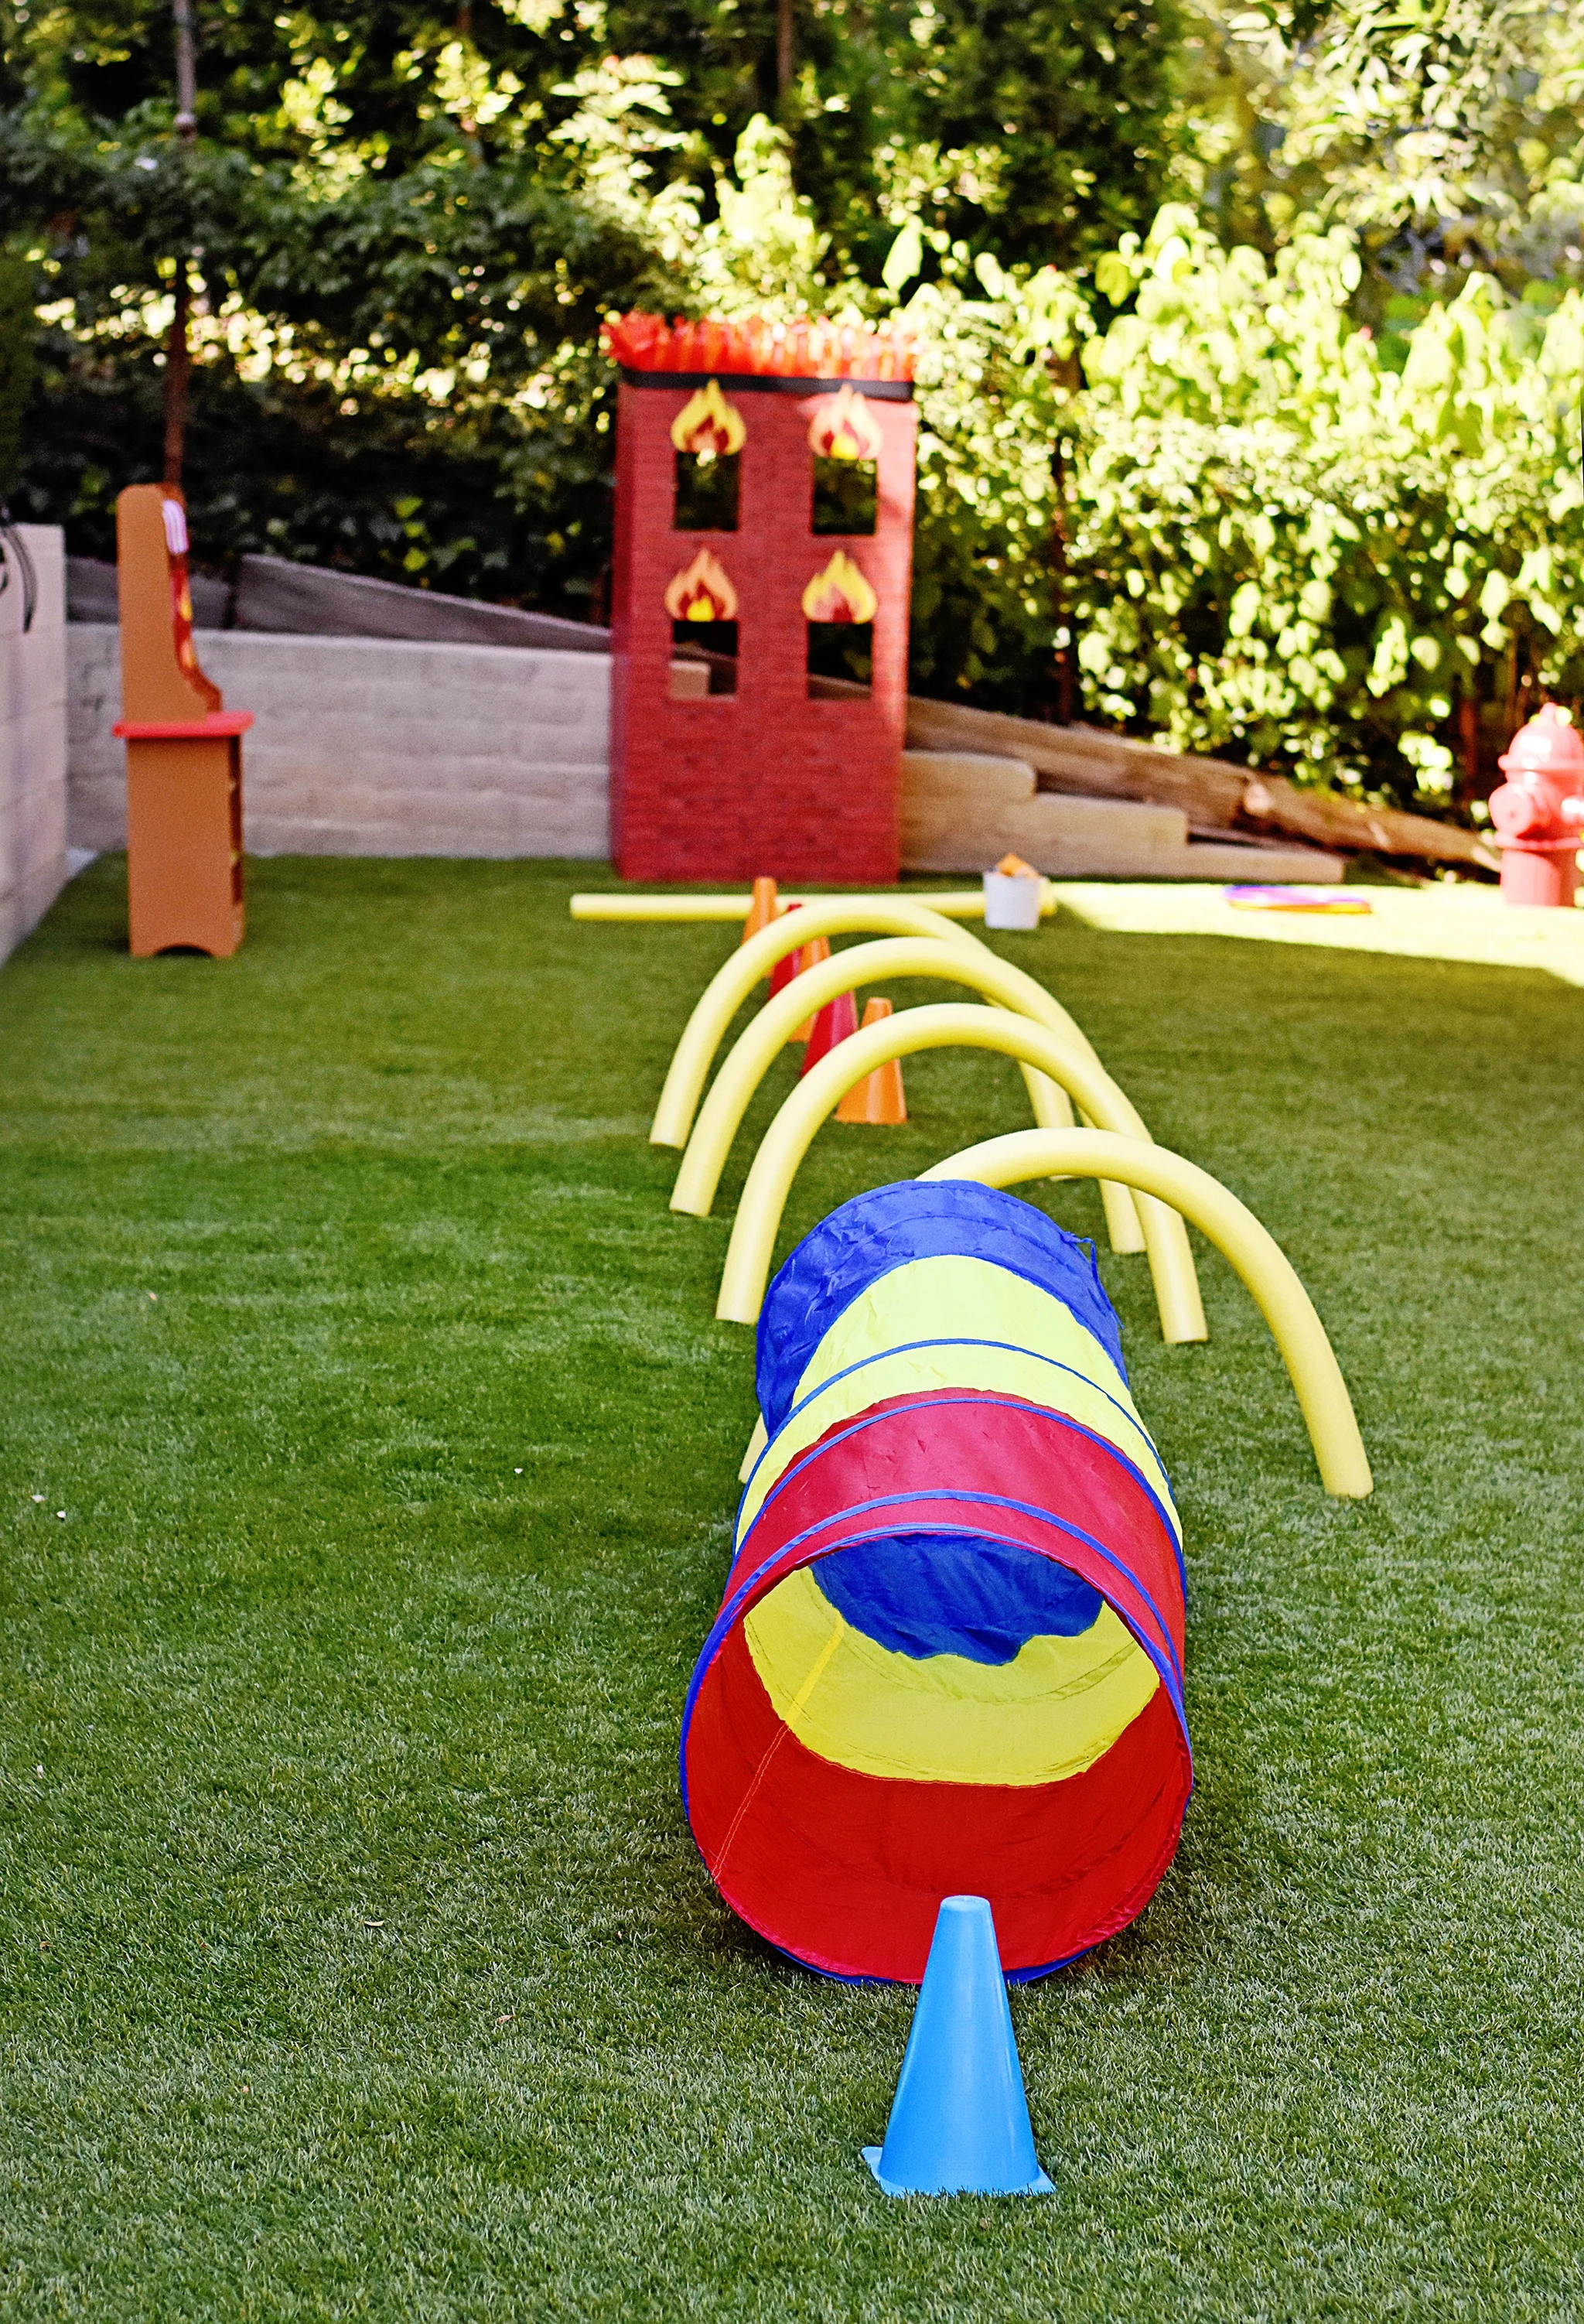 Set up a firefighter obstacle training course in your back yard!